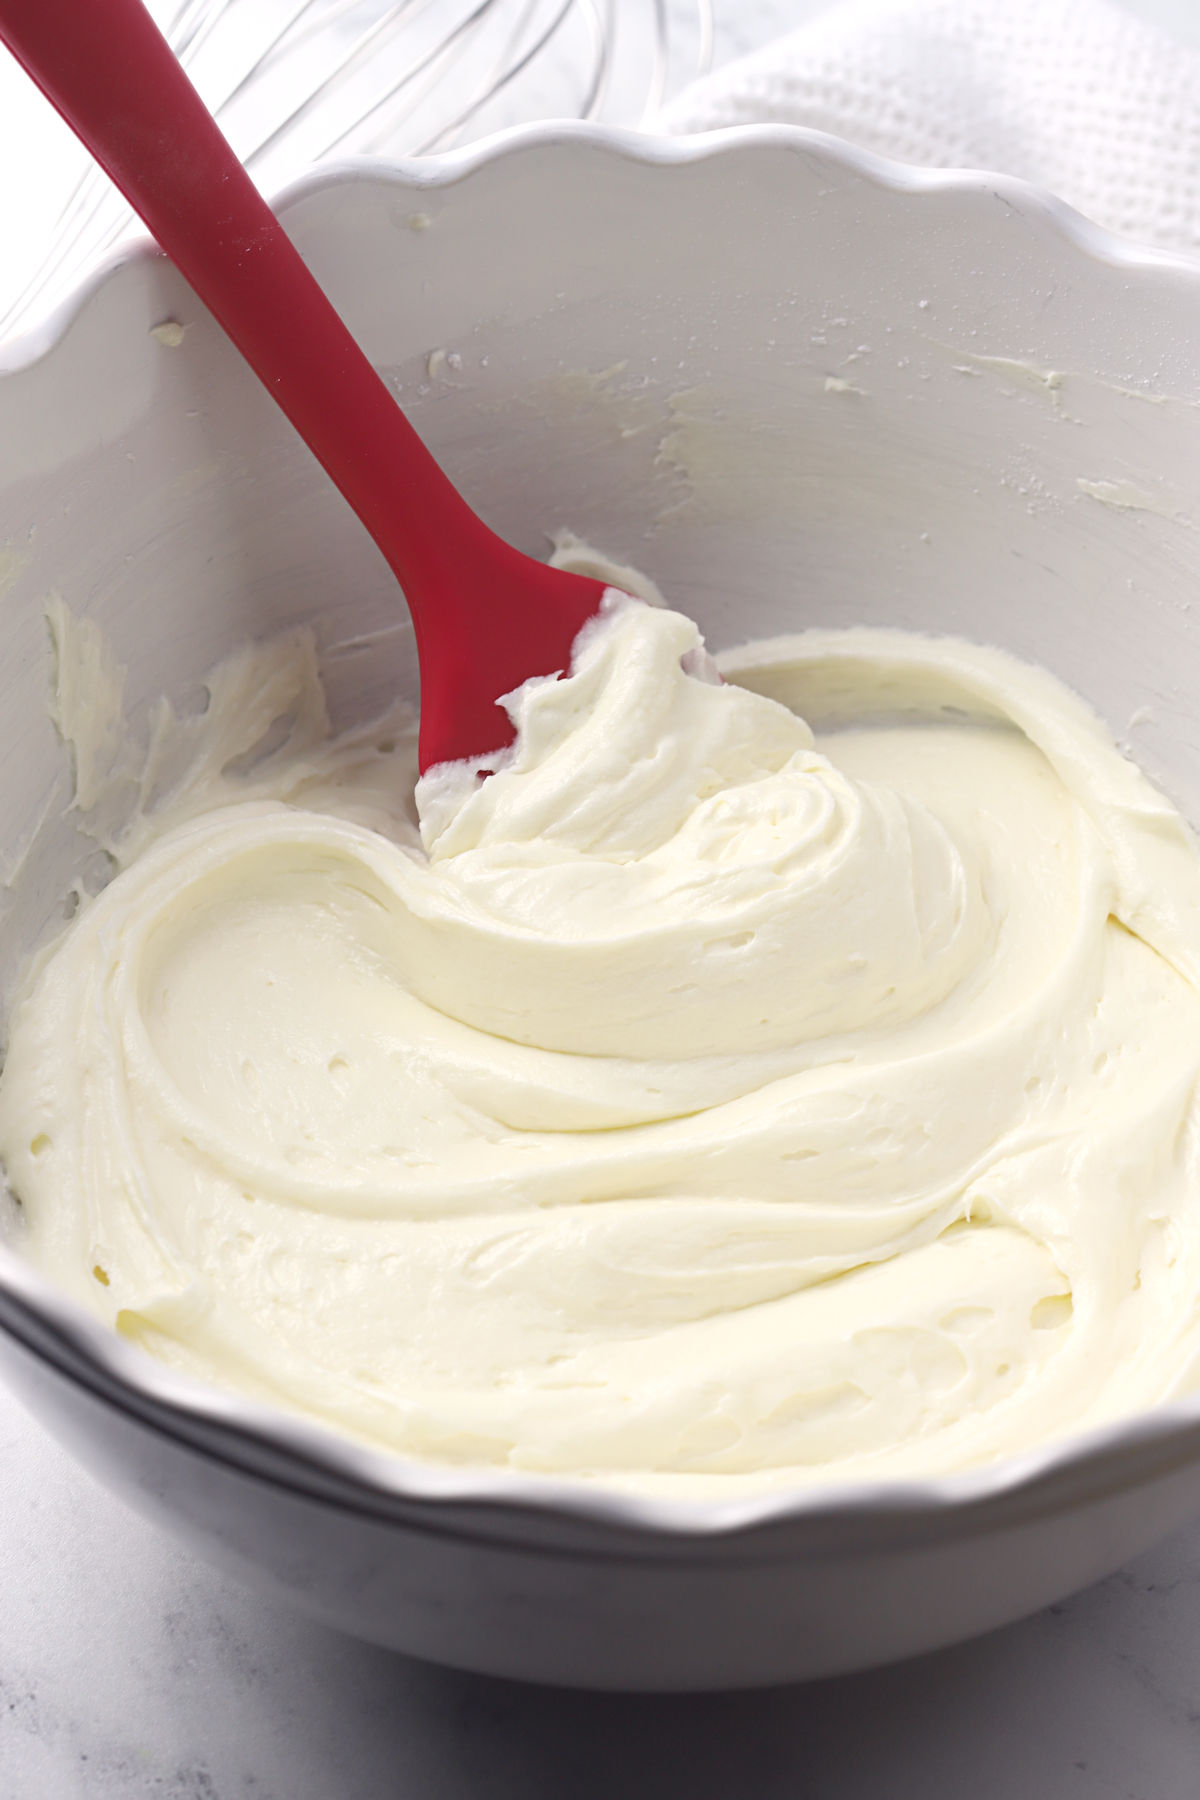 A white bowl filled with cream cheese frosting and a red spatula.